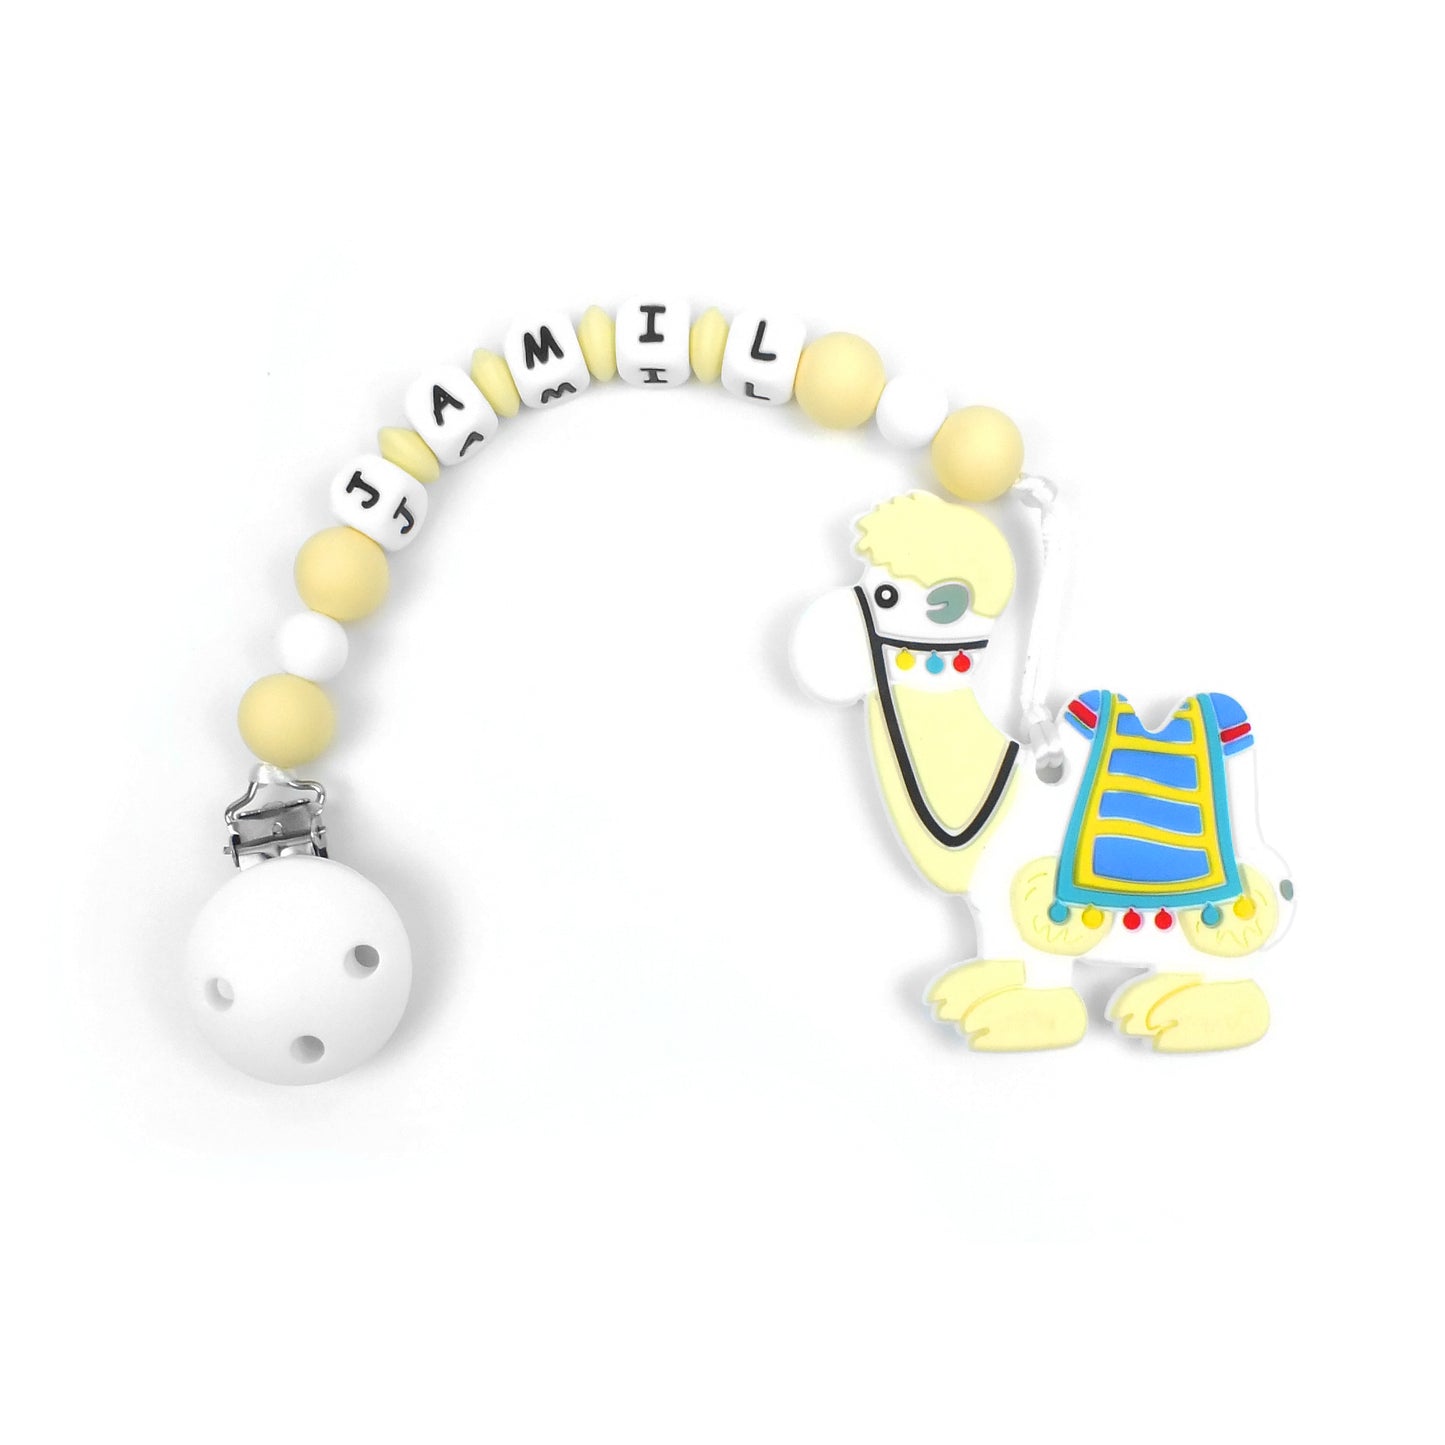 Camel Teether Chain - White